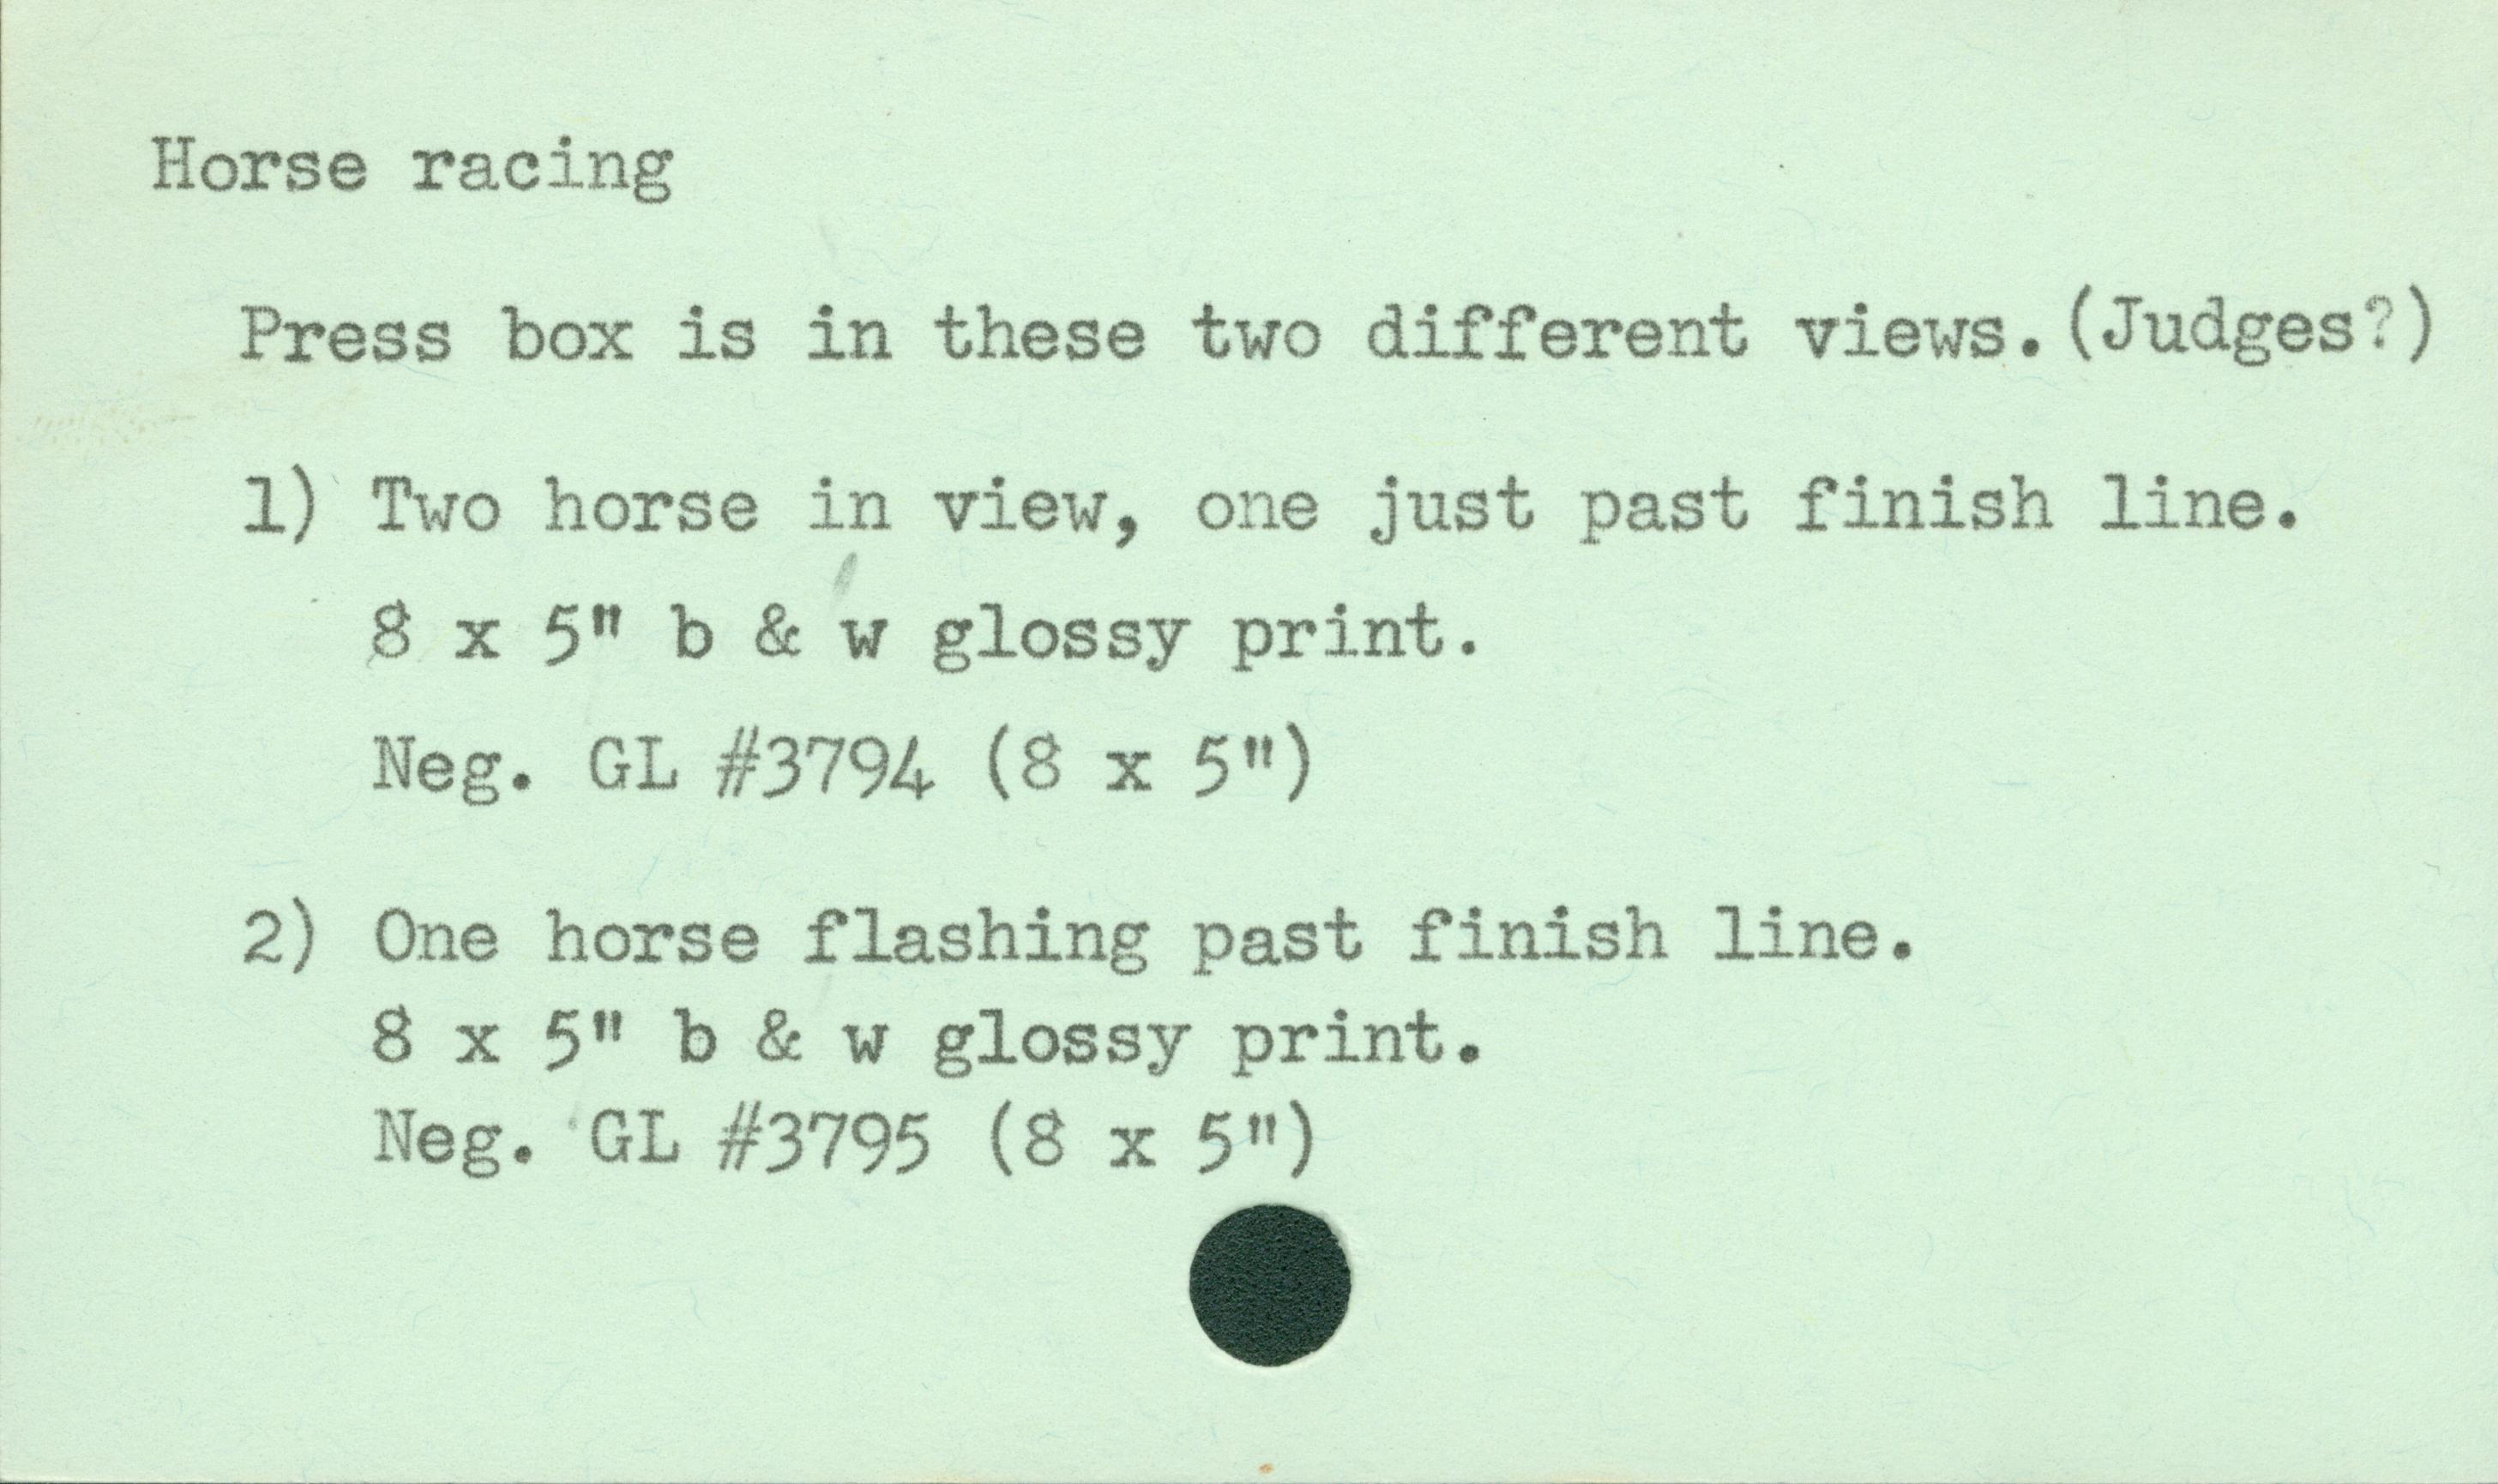 Horse racingPress Box is in these two different views. (Judges?) Two horse in view, one just past finish line8 x 5 b & w glossy printNeg. GL #3794 (8 x 5 in.)One horse flashing past finish line8 x 5 b & w glossy printNeg. GL #3795 (8 X 5 in)